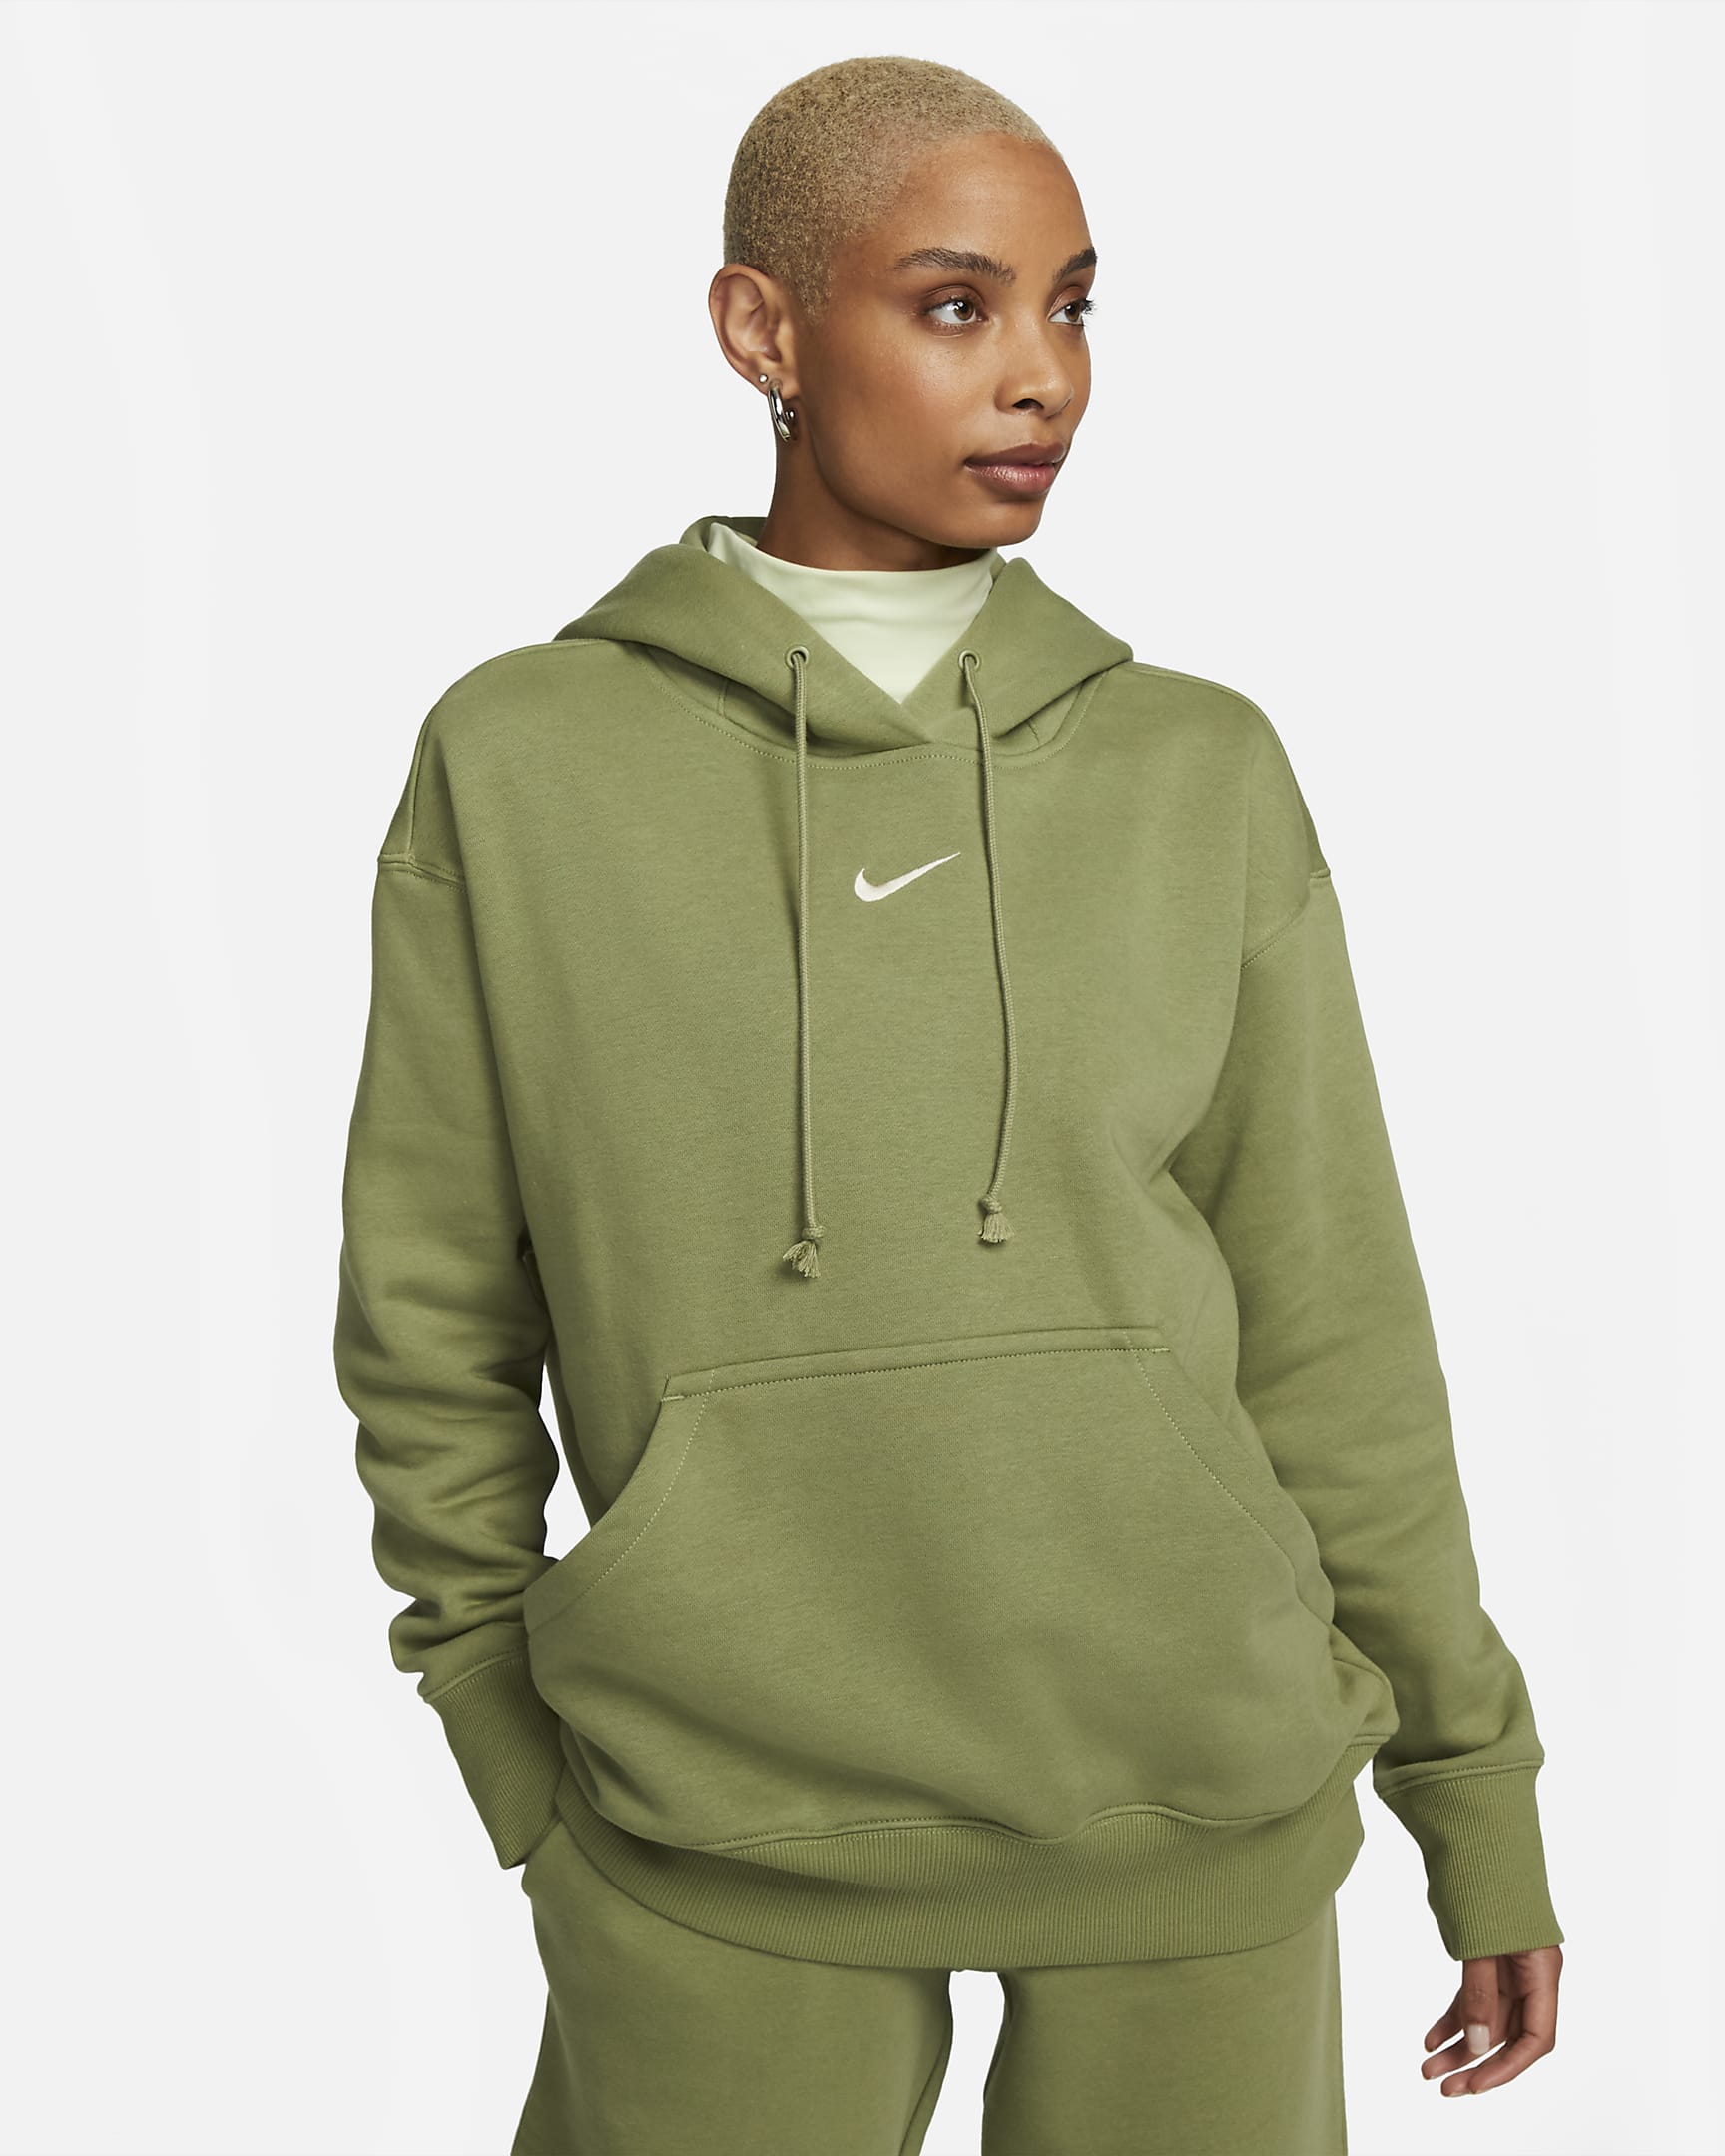 Nike Last Chance Sale: Up to 50% off on Select Styles